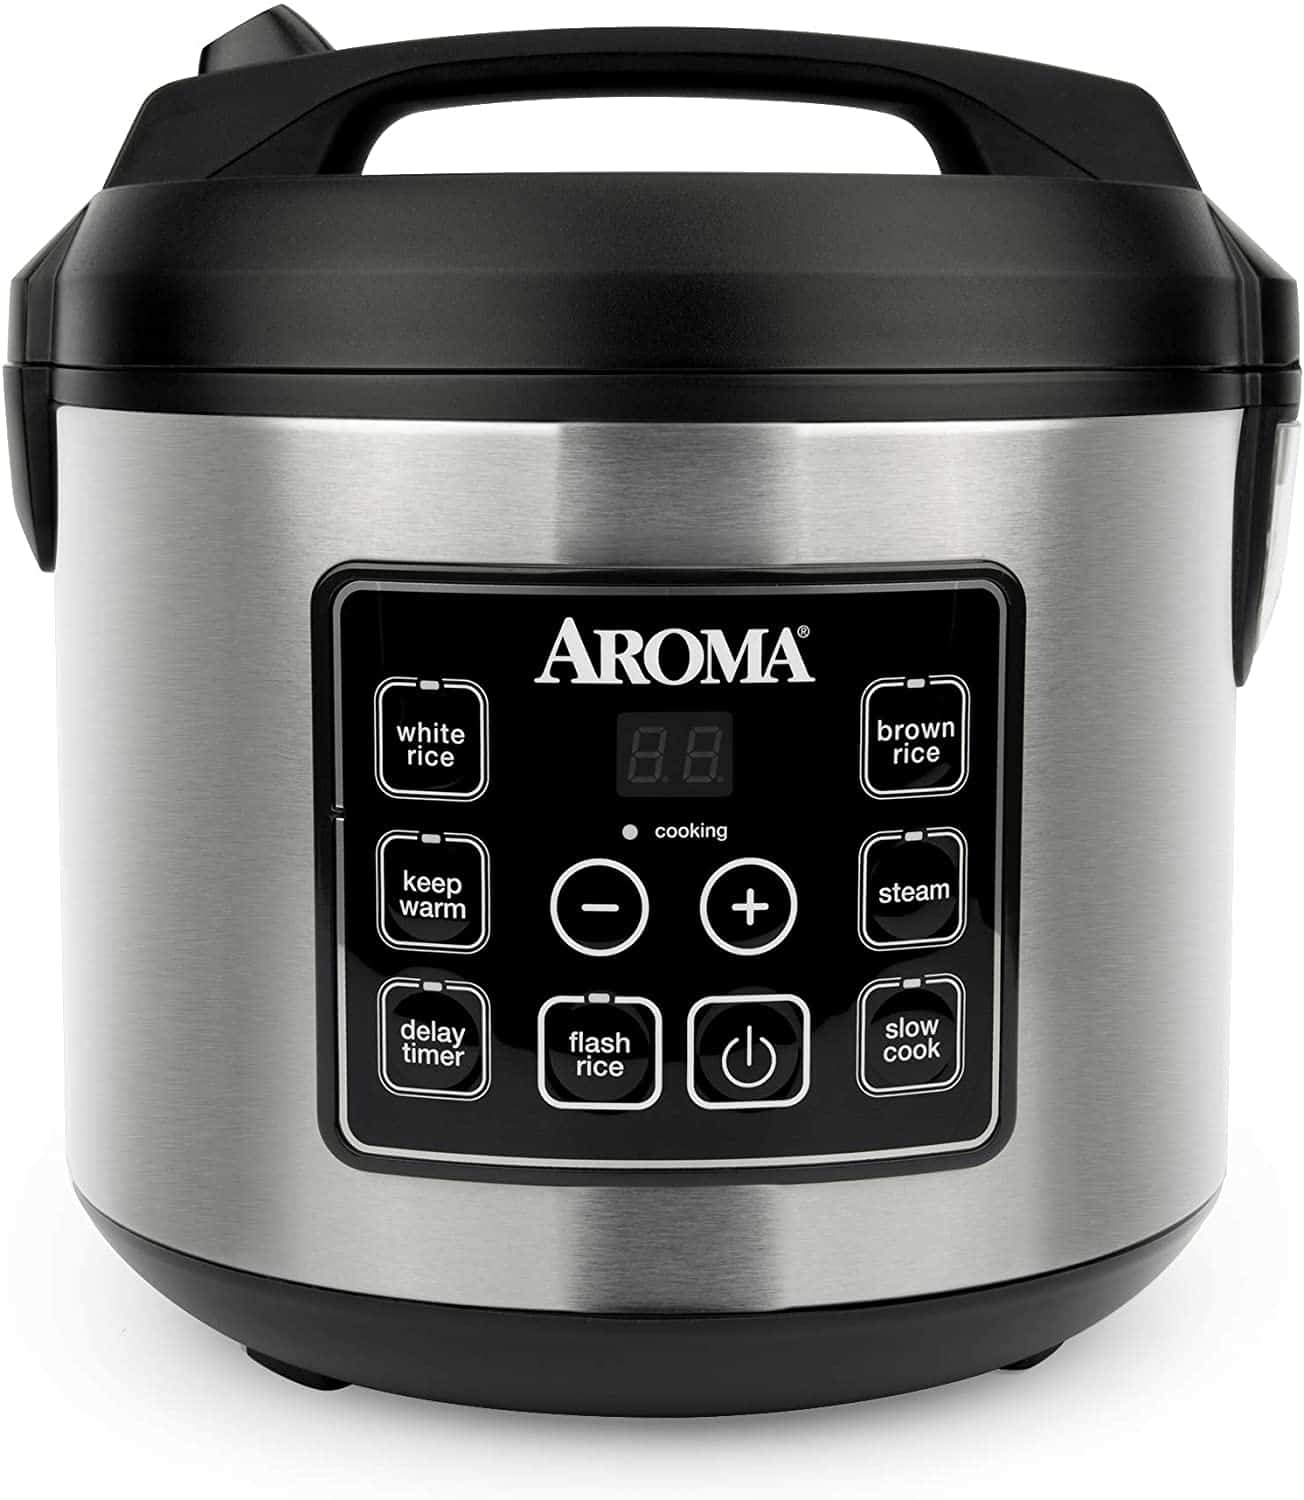 Best budget rice cooker for basmati: Aroma Housewares 20 Cup